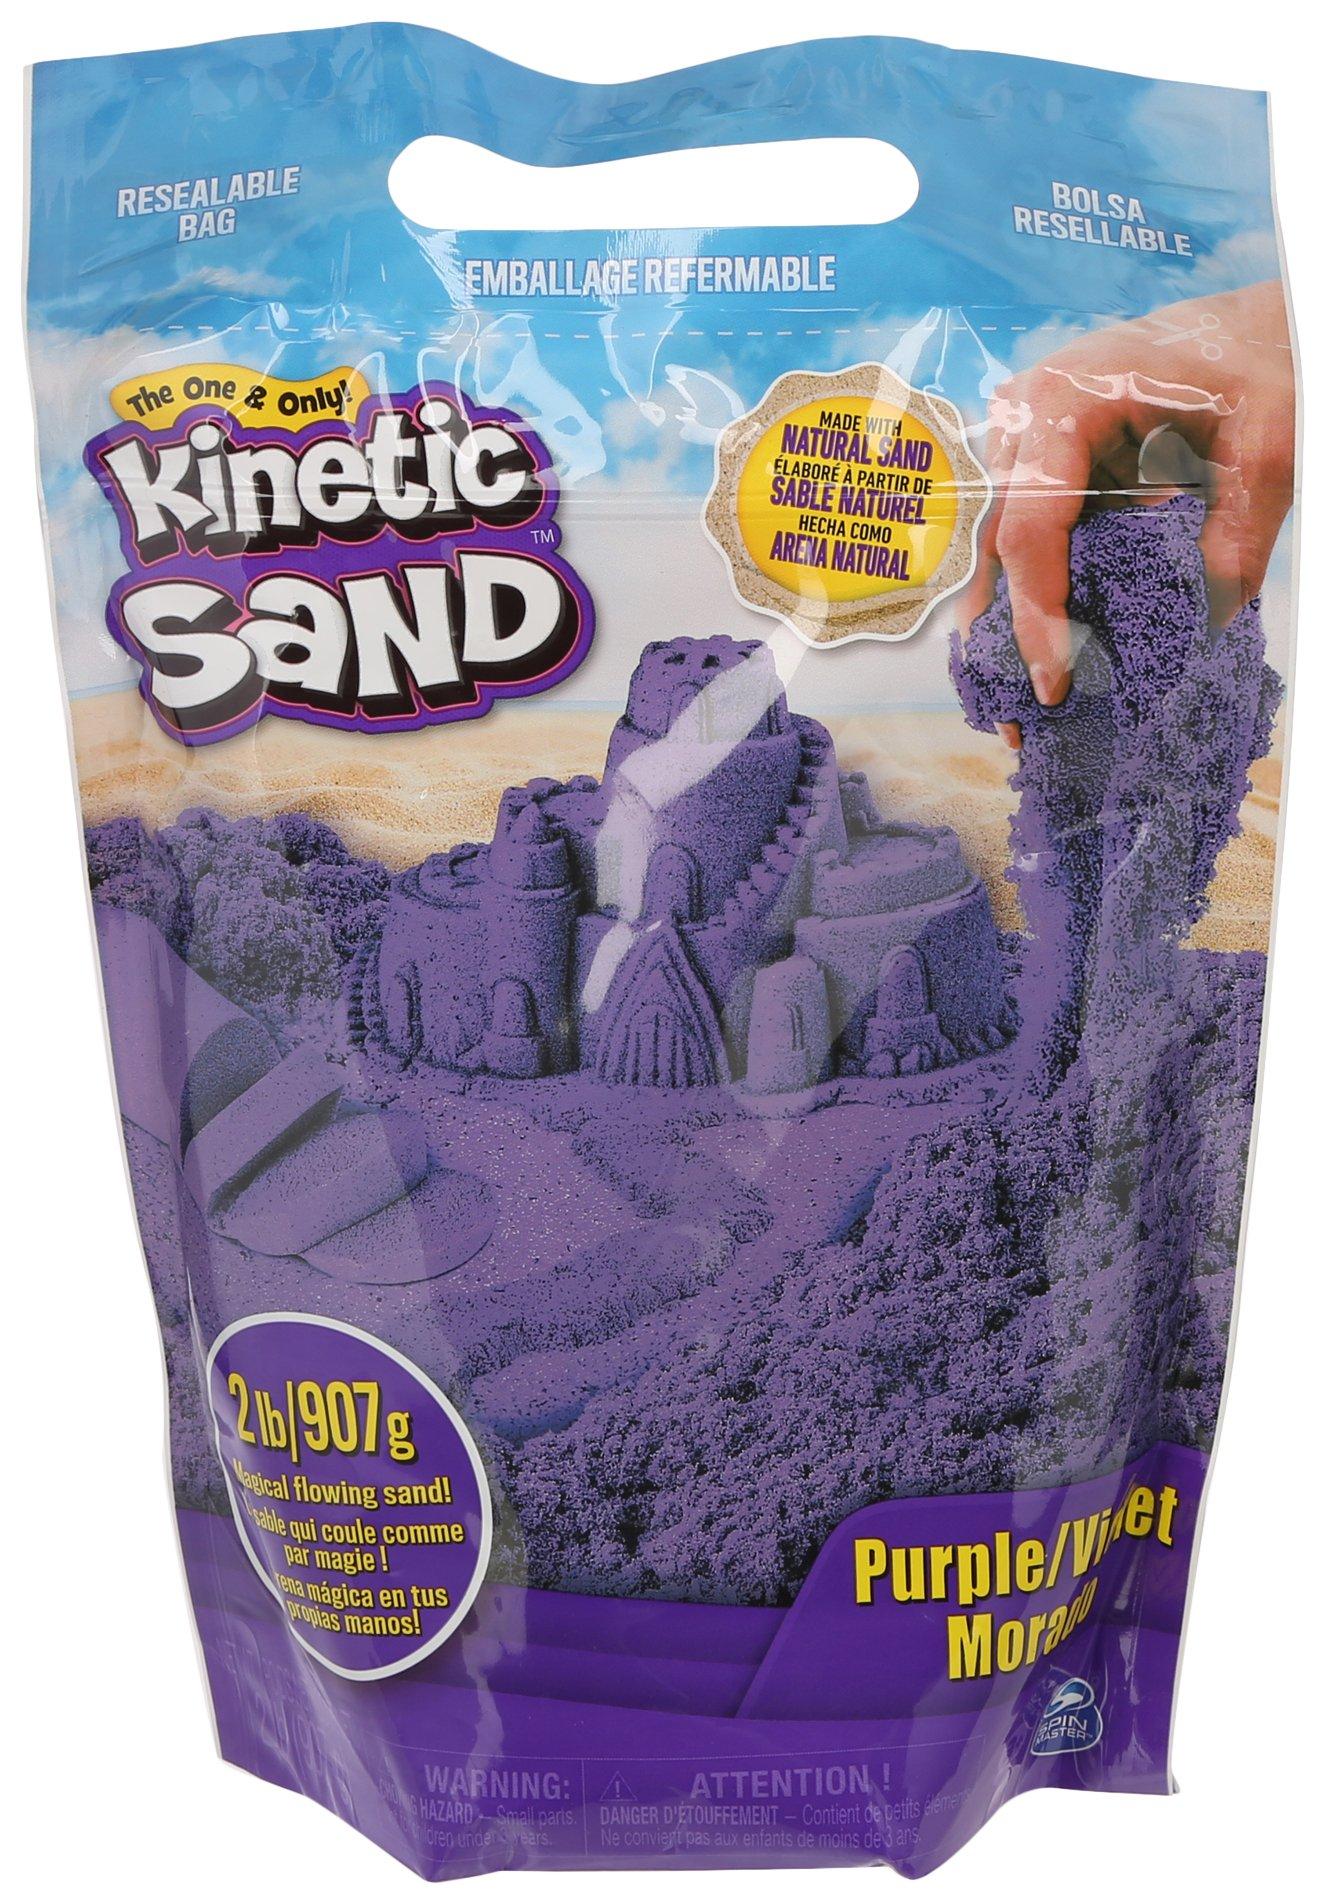 Kinetic Sand 2 Lb Resealable Bag of Magic Flowing Sand